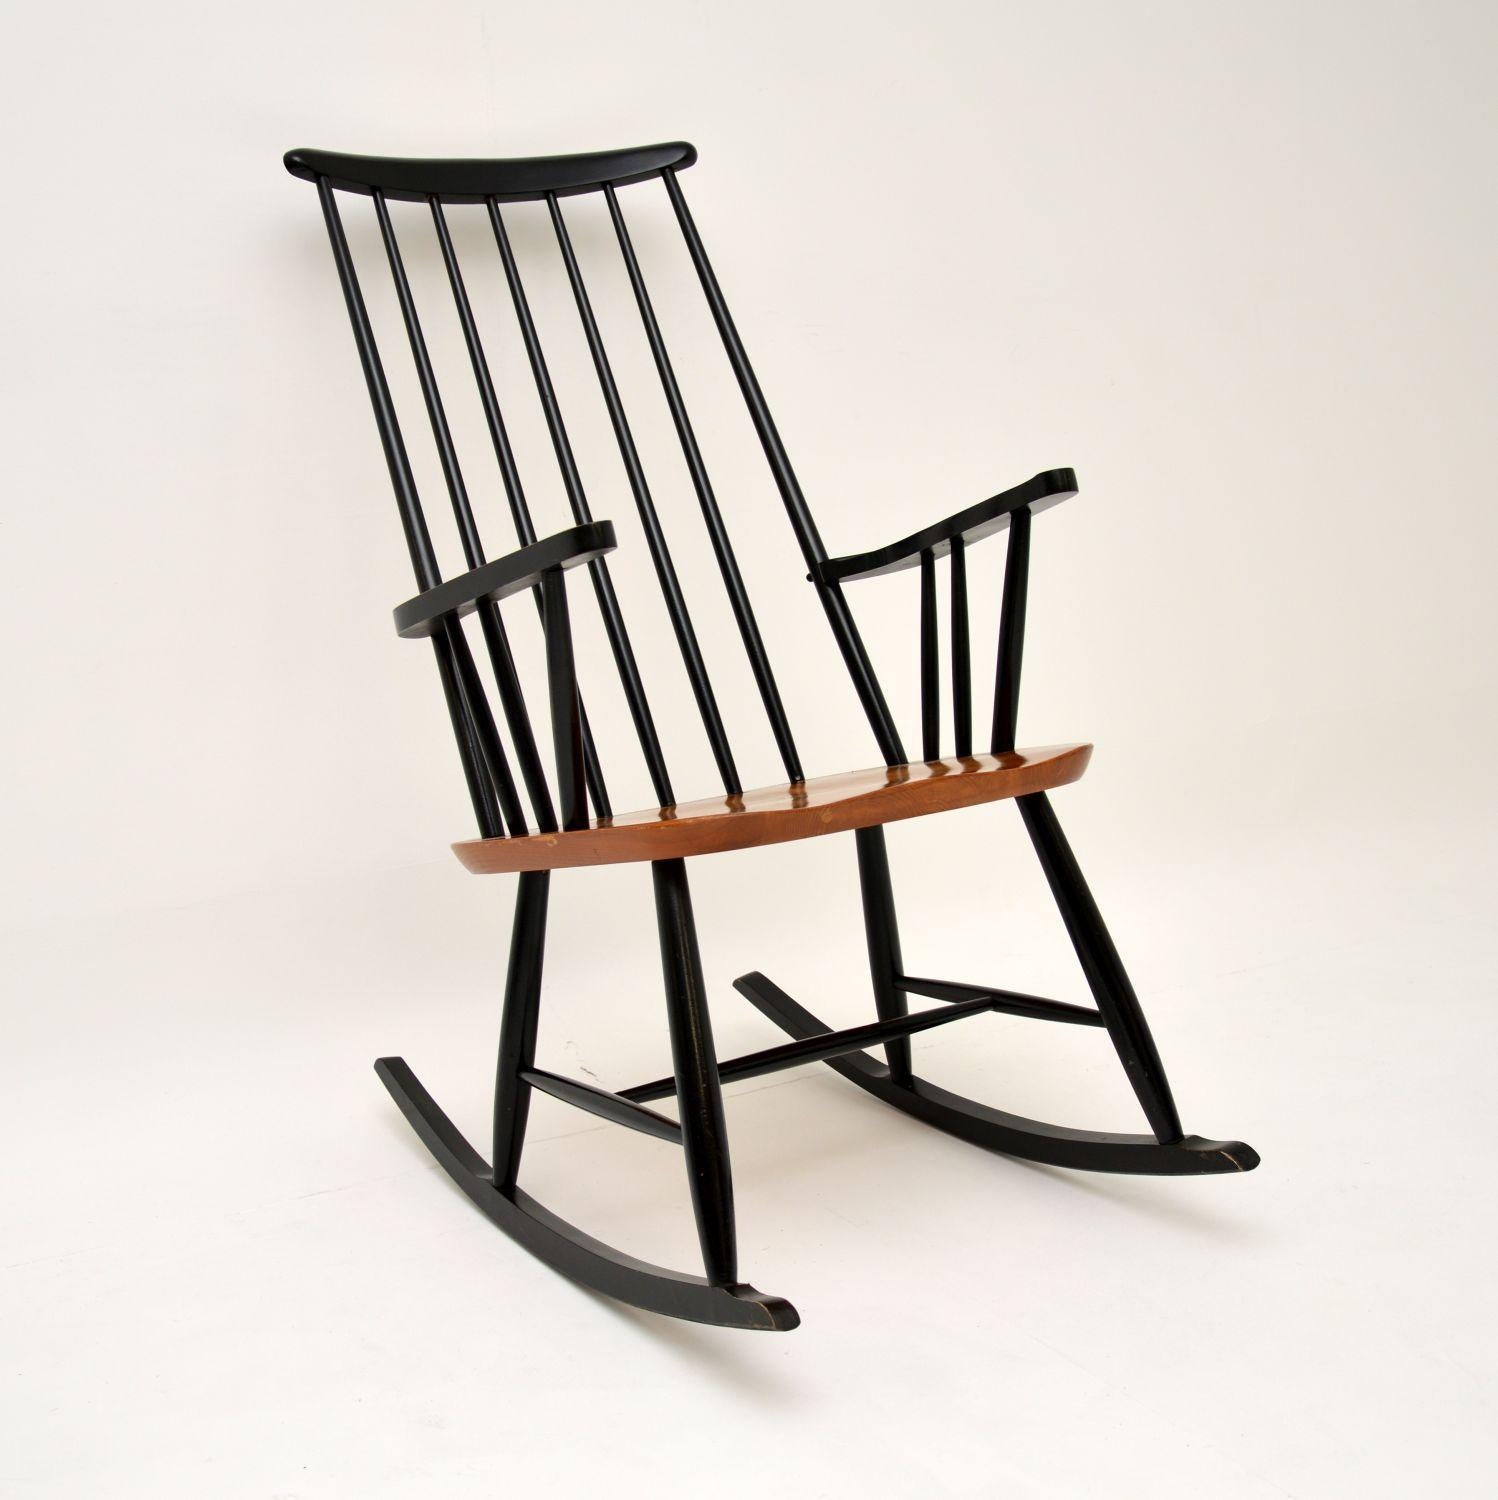 A wonderful original vintage rocking chair in solid ebonised wood, with a solid elm seat. This was made in the former Yugoslavia, it dates from the 1960’s.

This is very well made, structurally sound and comfortable. It has a fantastic design and